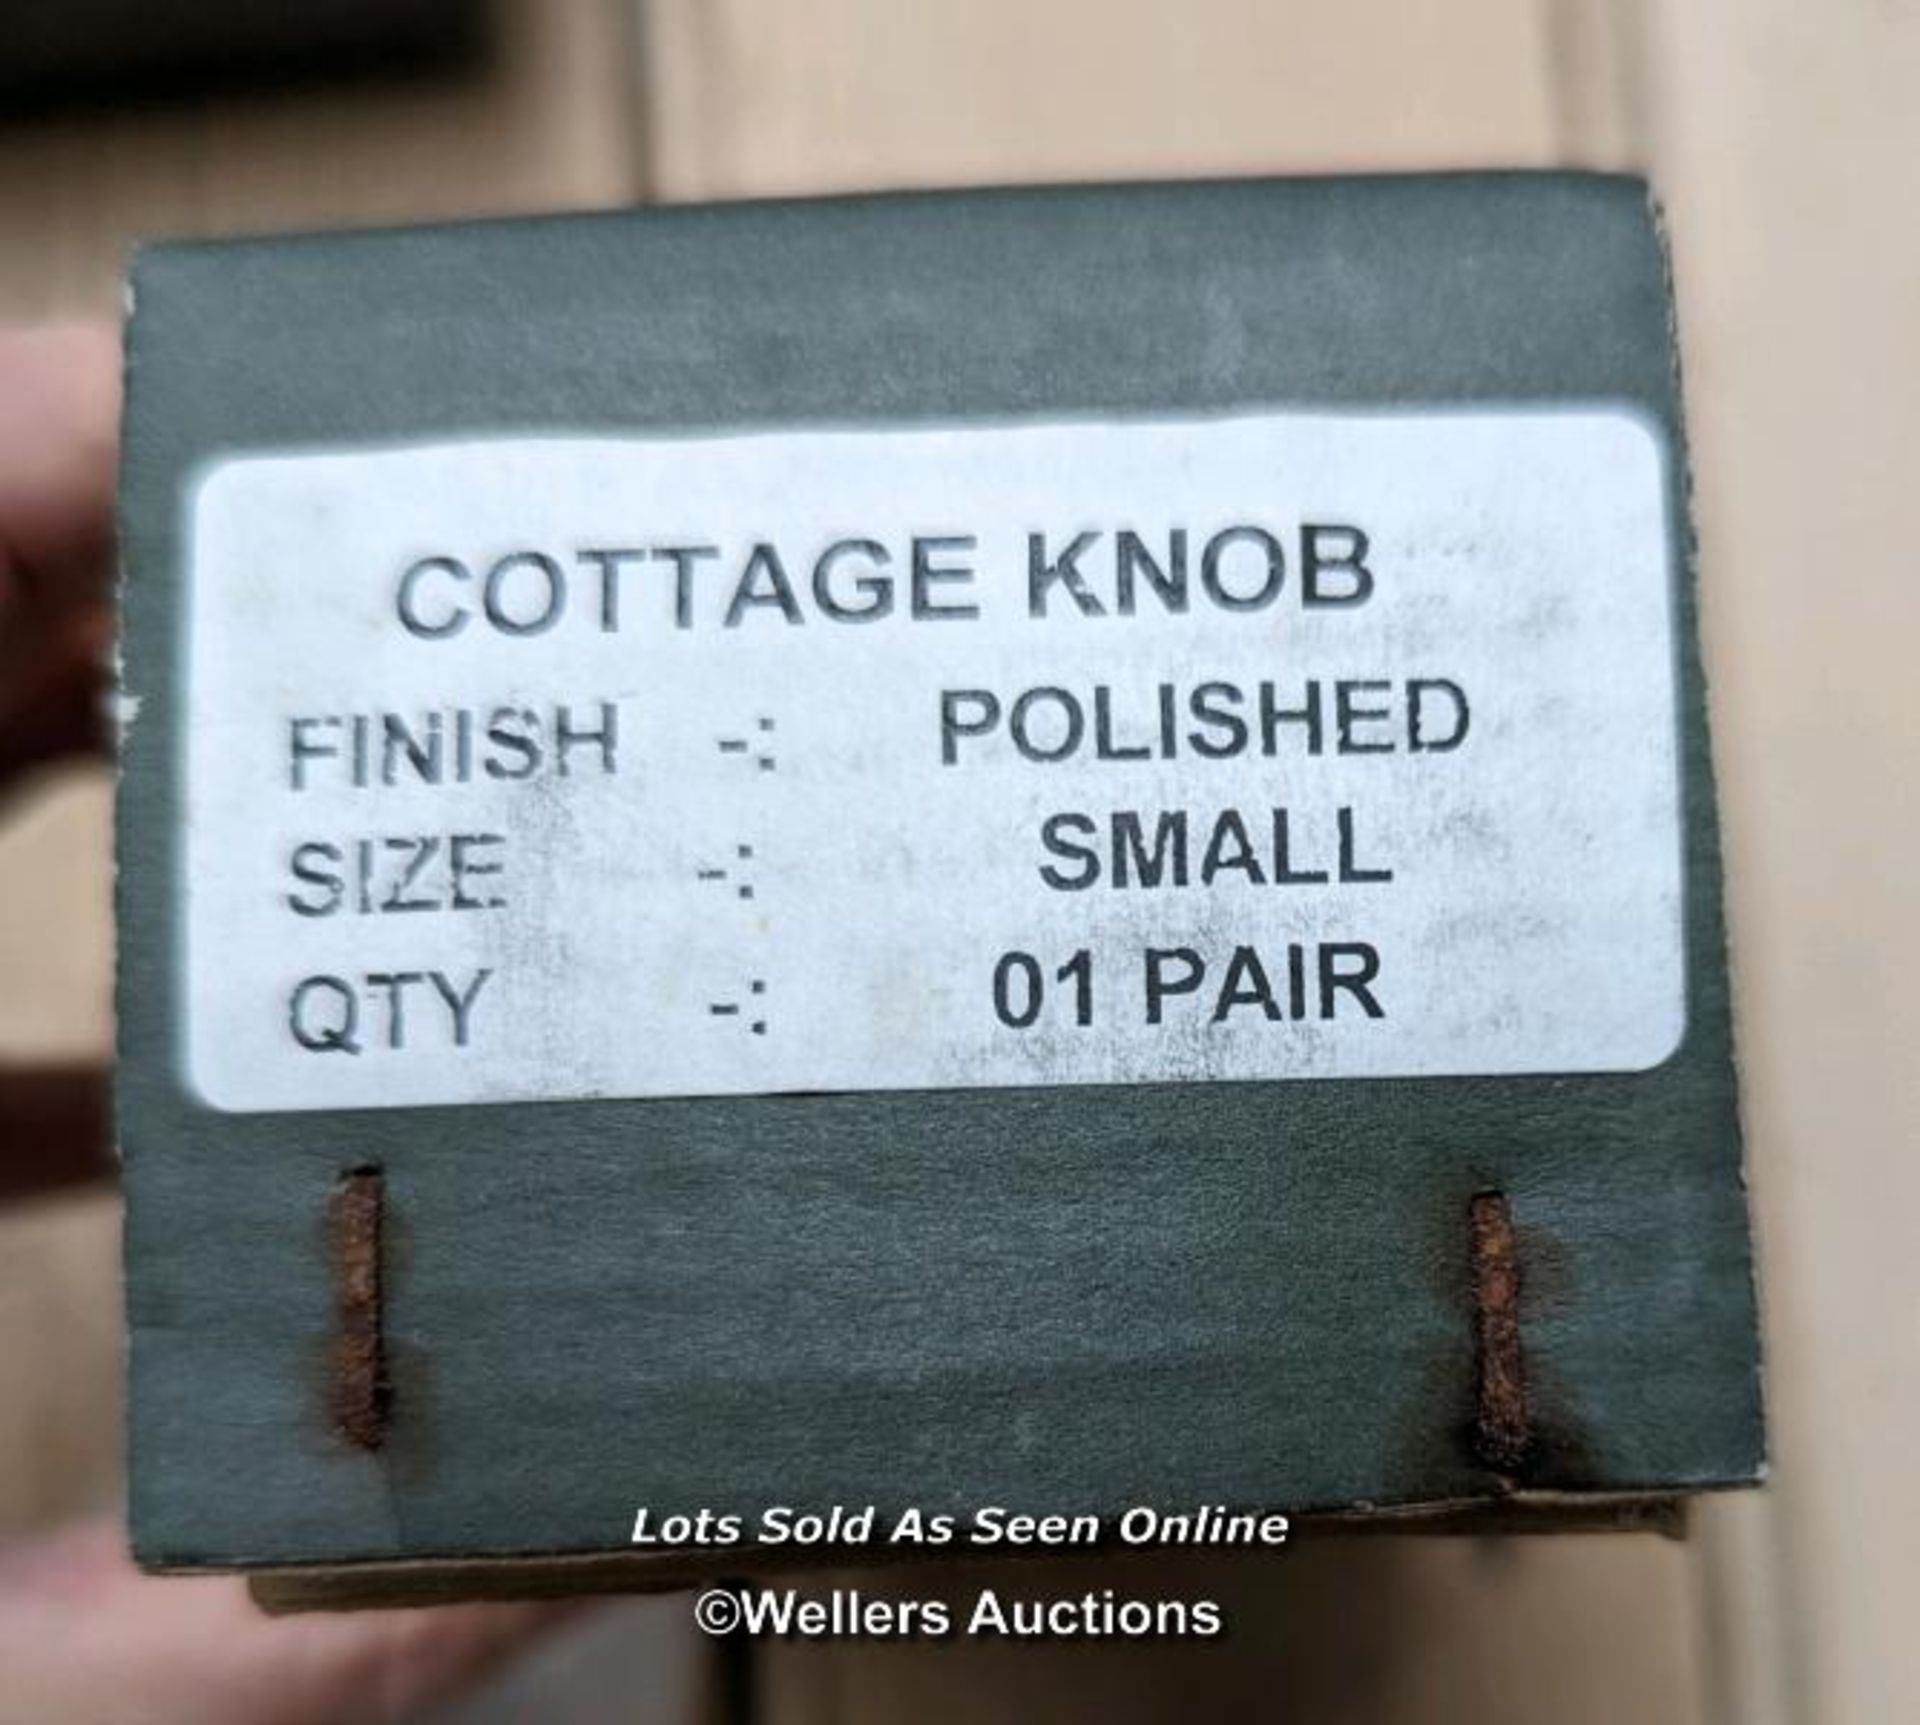 5 pairs of new small cottage poished brass knobs including screws. Diameter of knob and rose 4cm. - Image 4 of 5